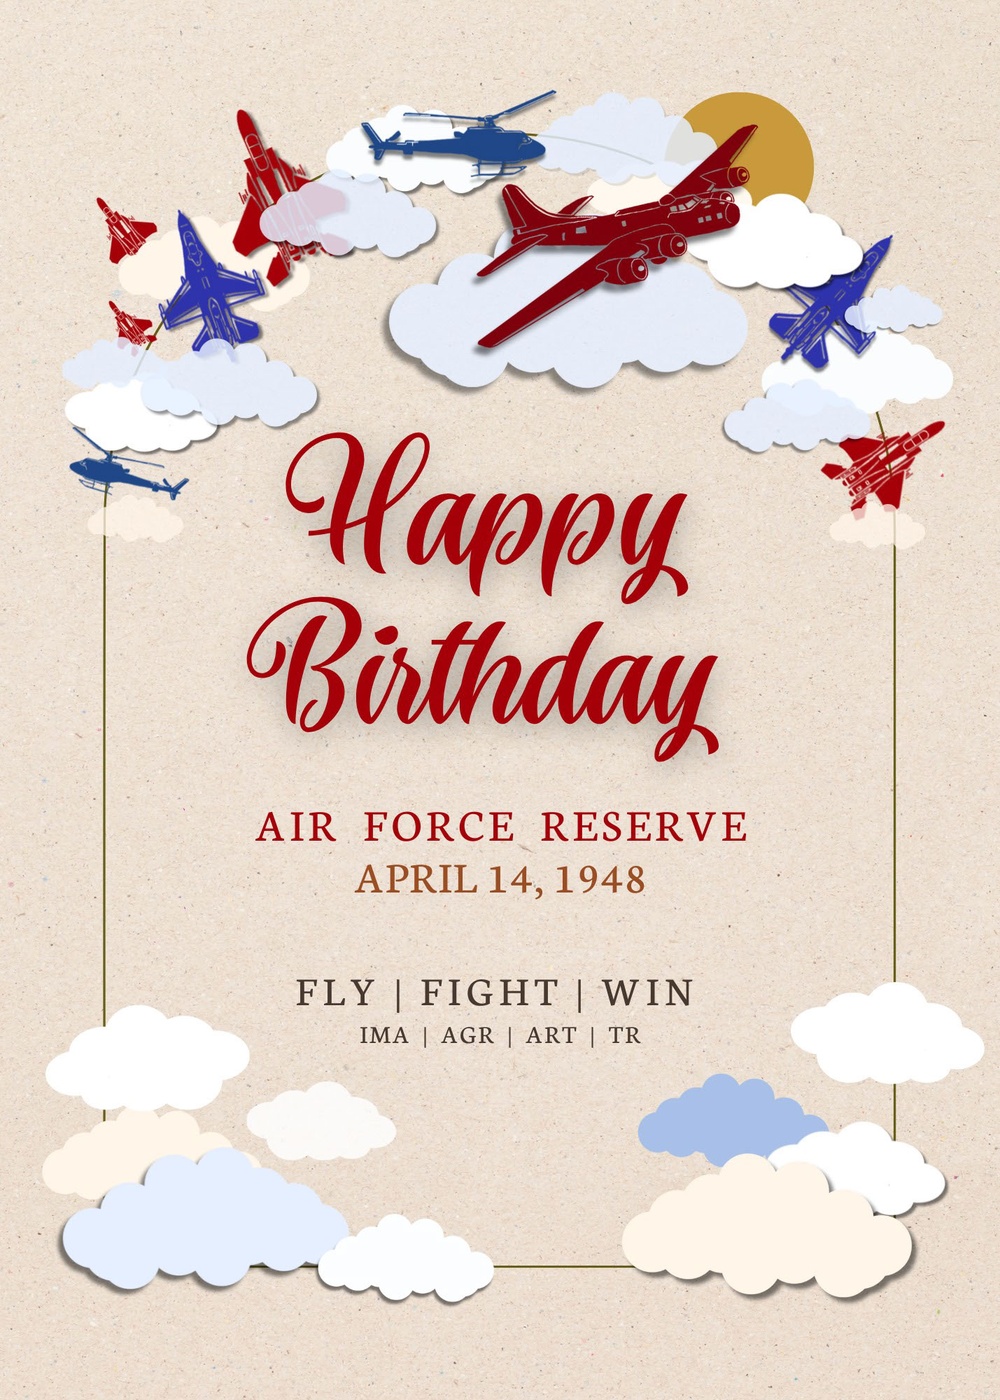 Happy Birthday, Air Force Reserve